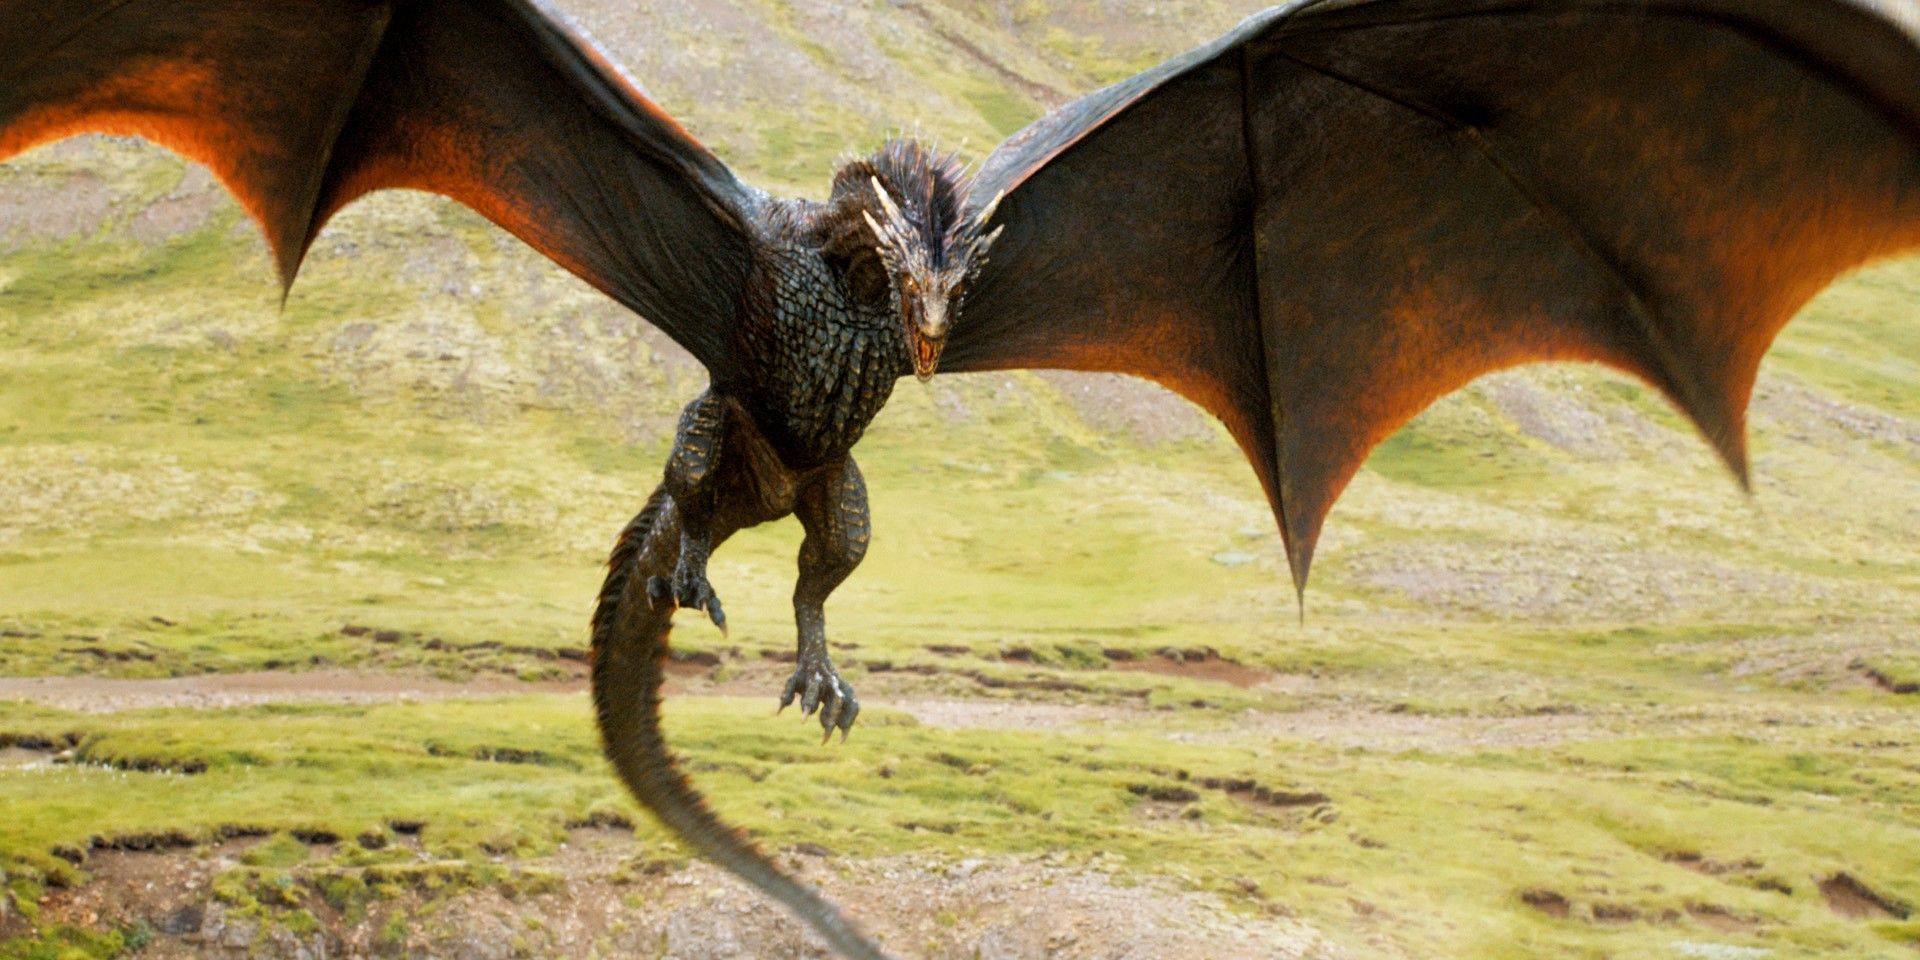 Drogon in Game of Thrones